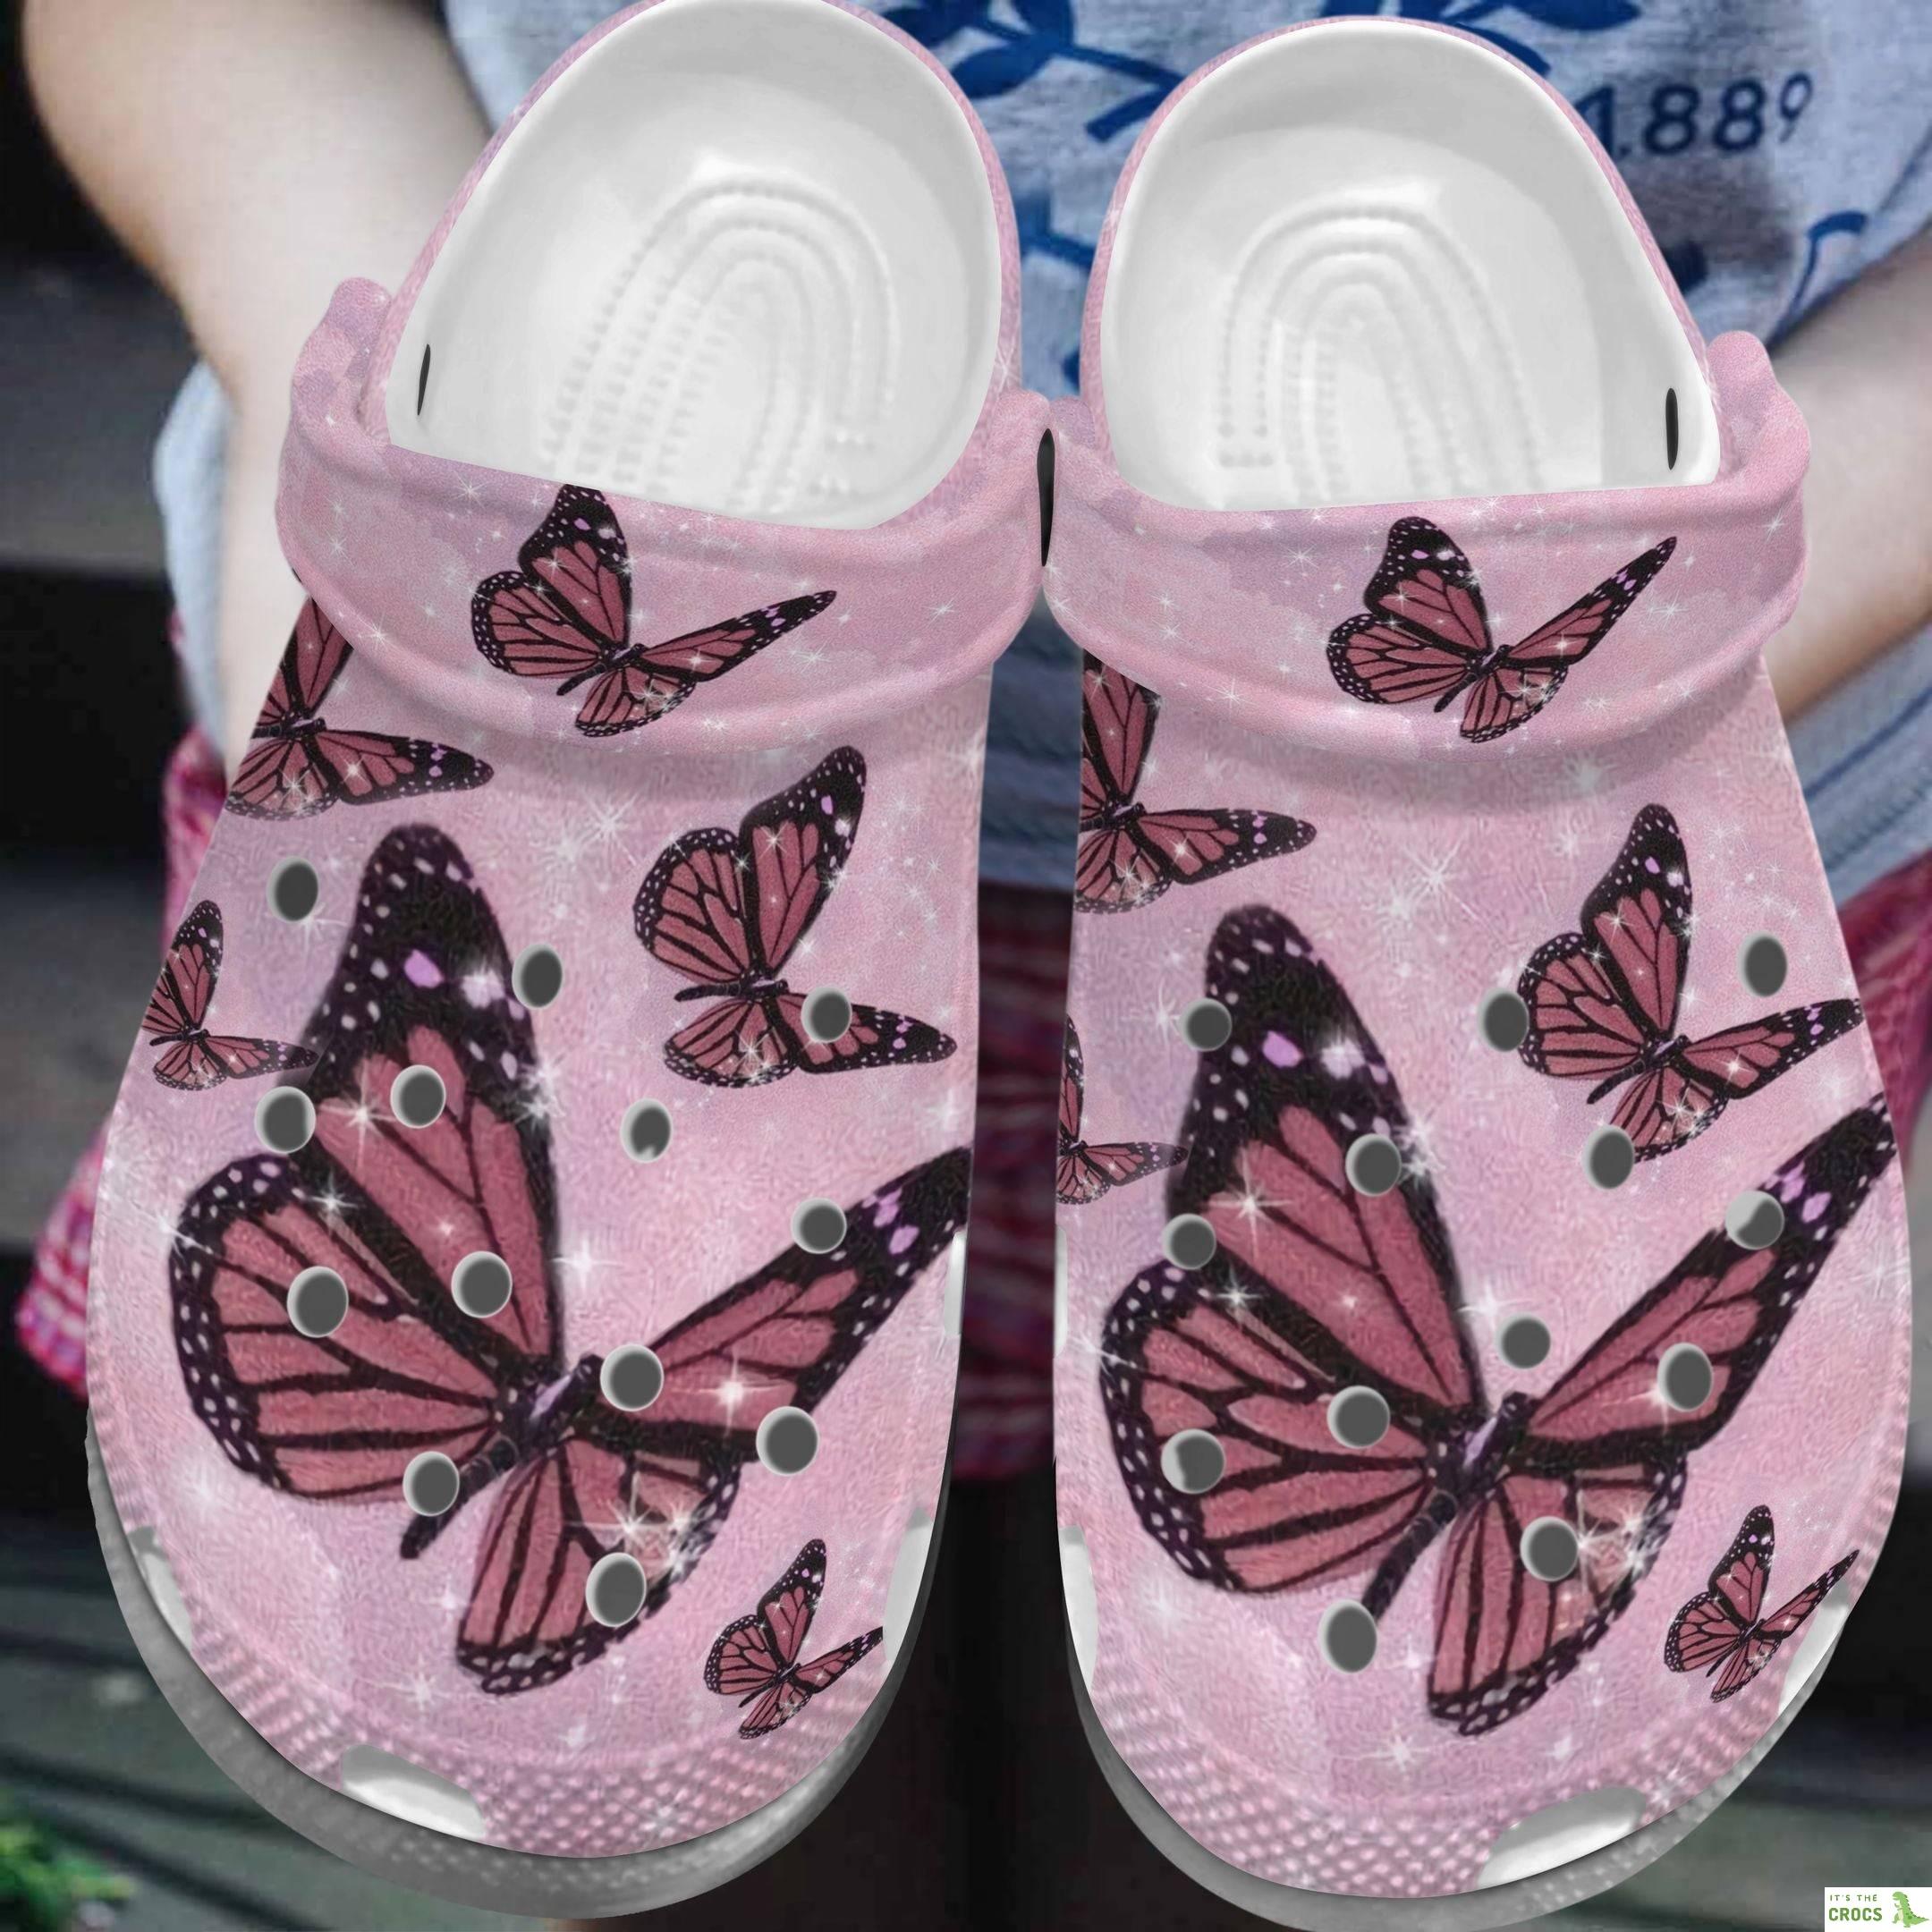 Pink Butterfly Bling Croc Shoes For Women – Cutie Butterfly Shoes Crocbland Clog Birthday Gifts For Daughter Mom Niece